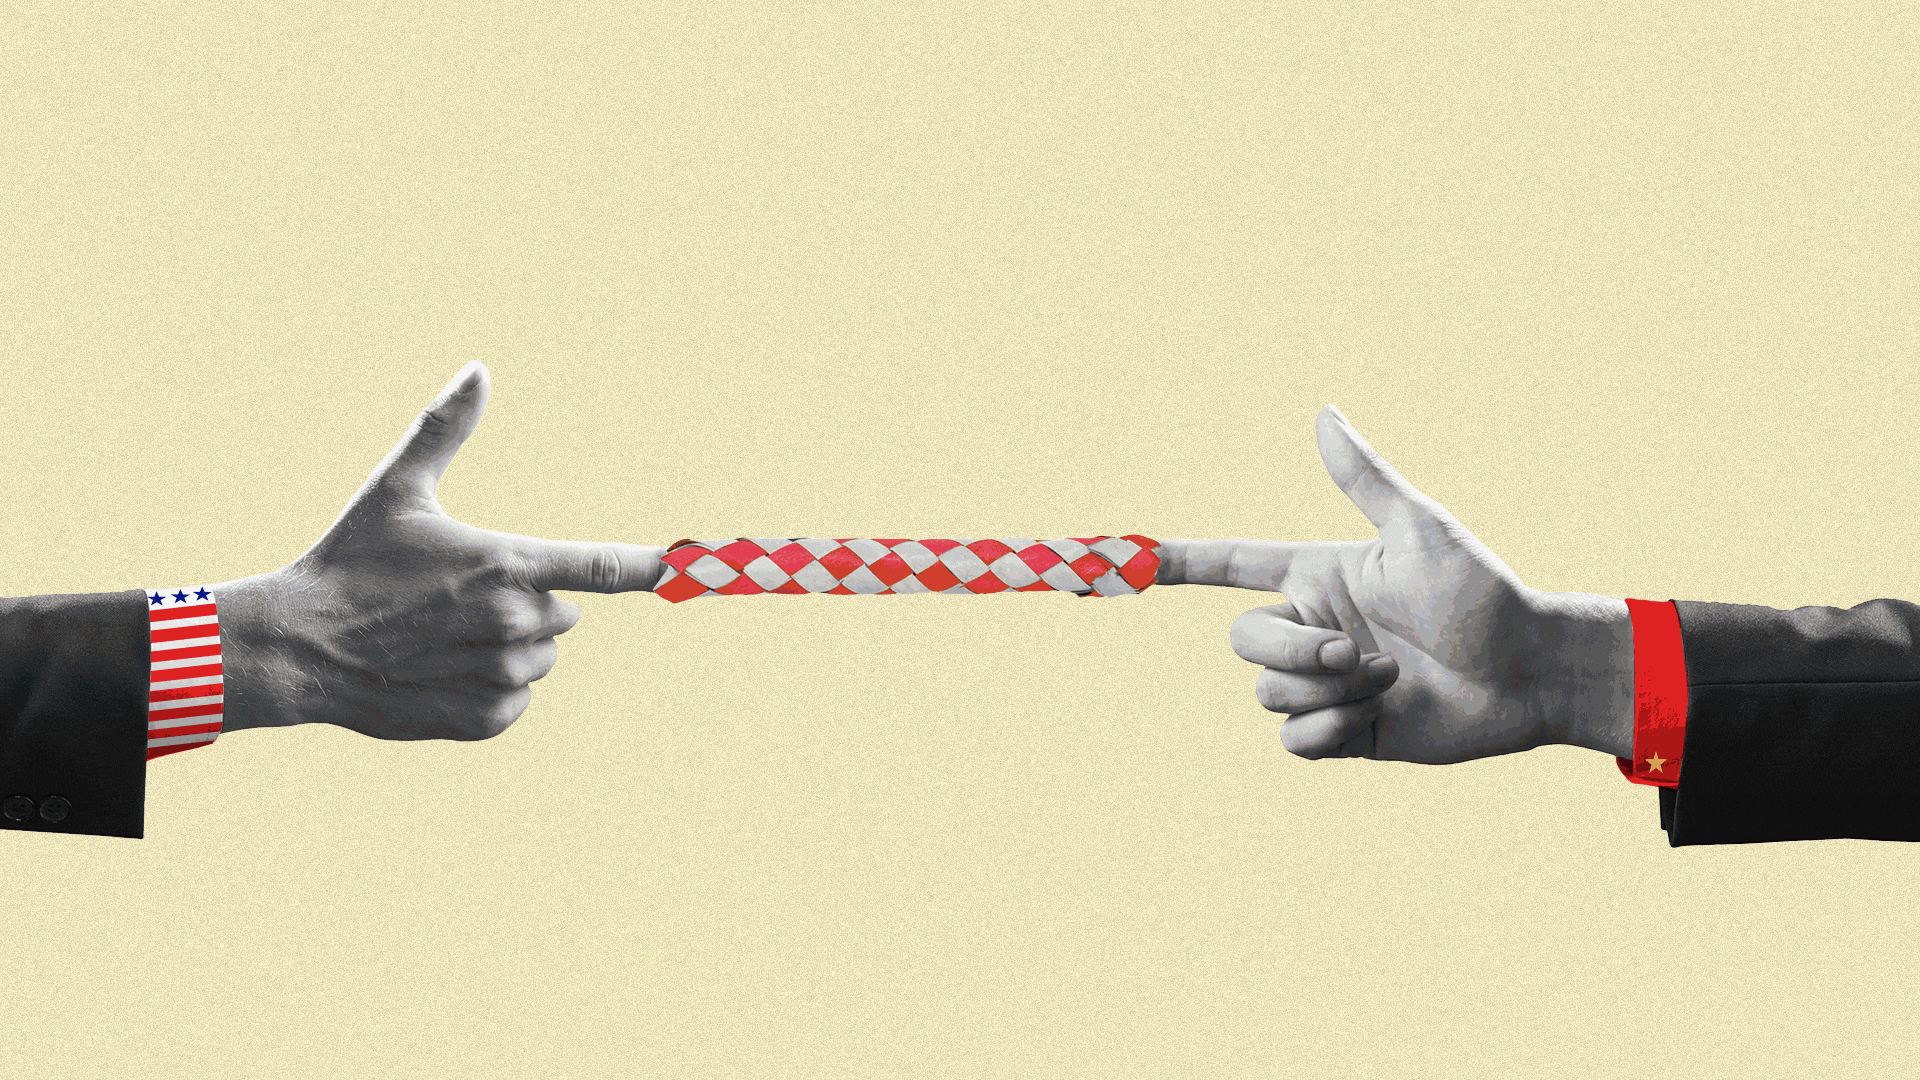 Animation of a Chinese finger trap being pulled back and forth by hands representing the United States and China